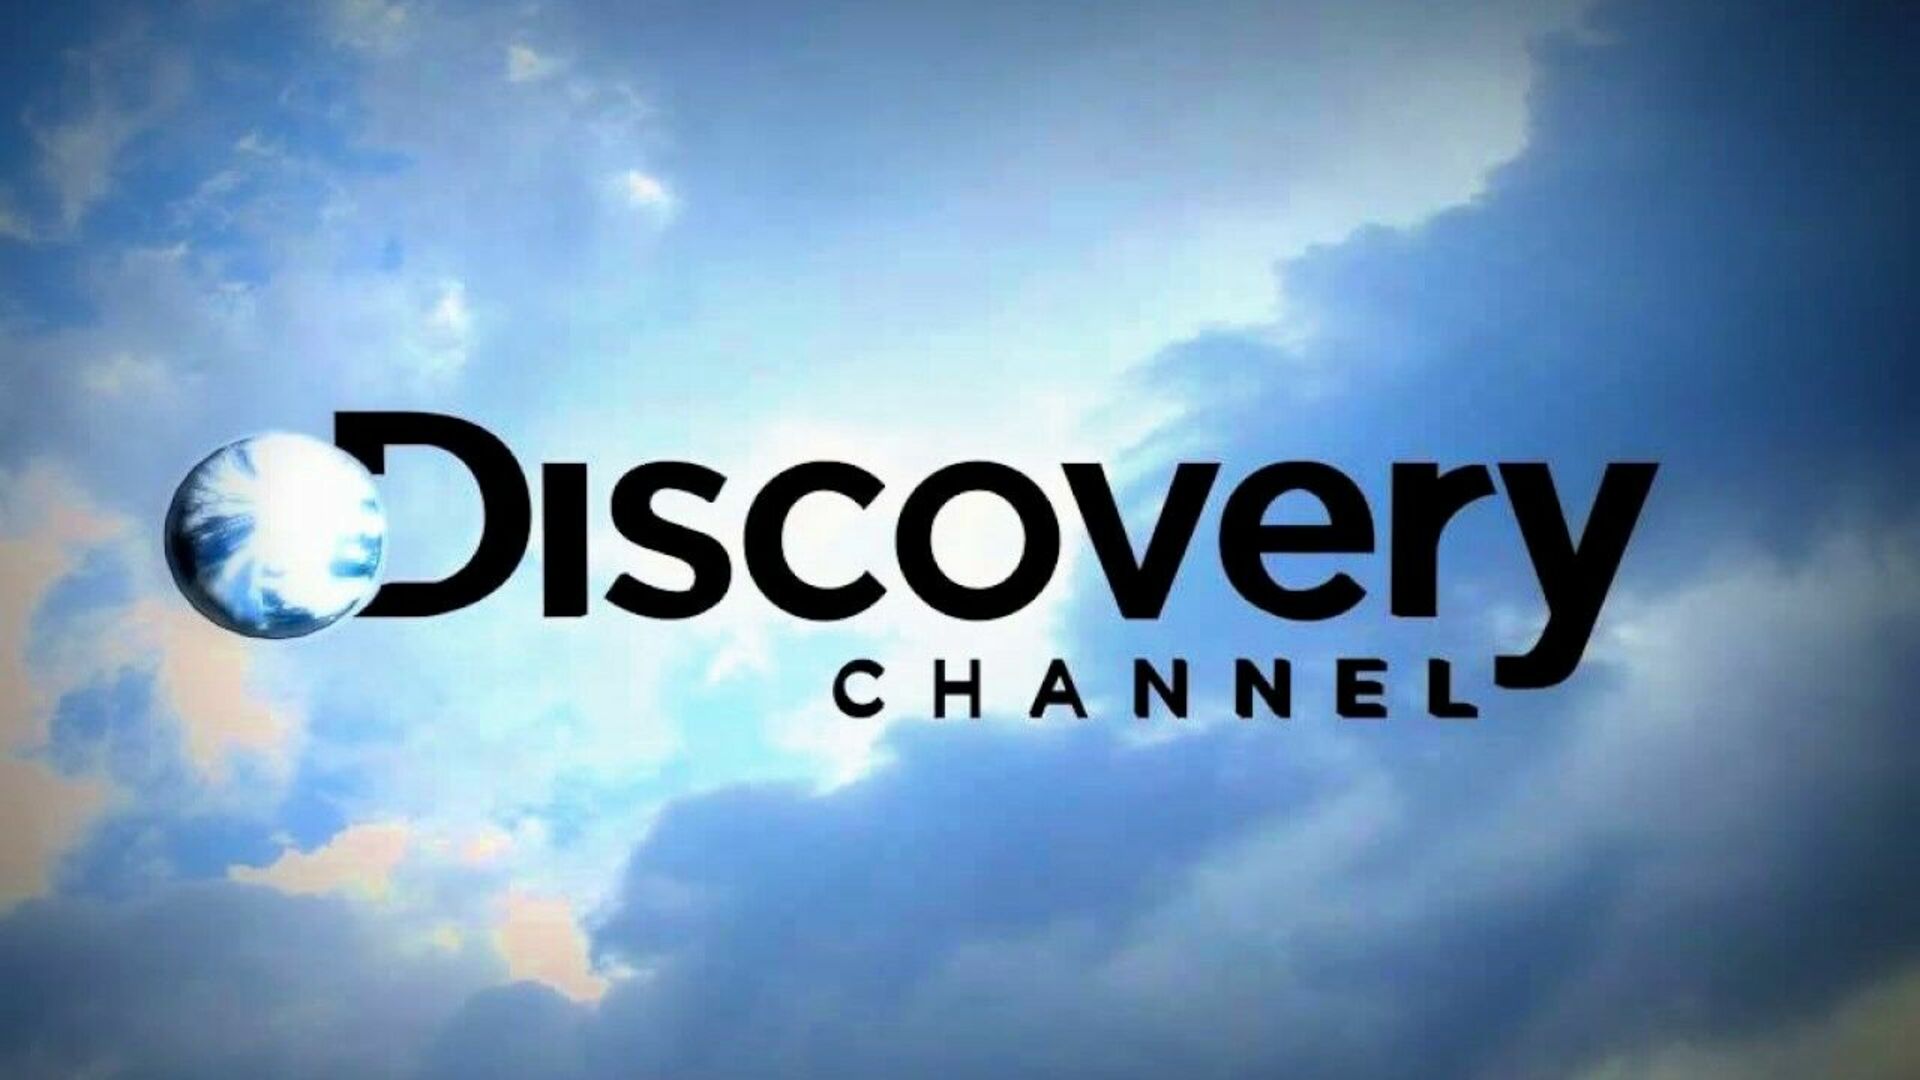 Discover groups. Телеканал Discovery. Дискавери заставка. Дискавери канал ТВ. Discovery channel заставка.